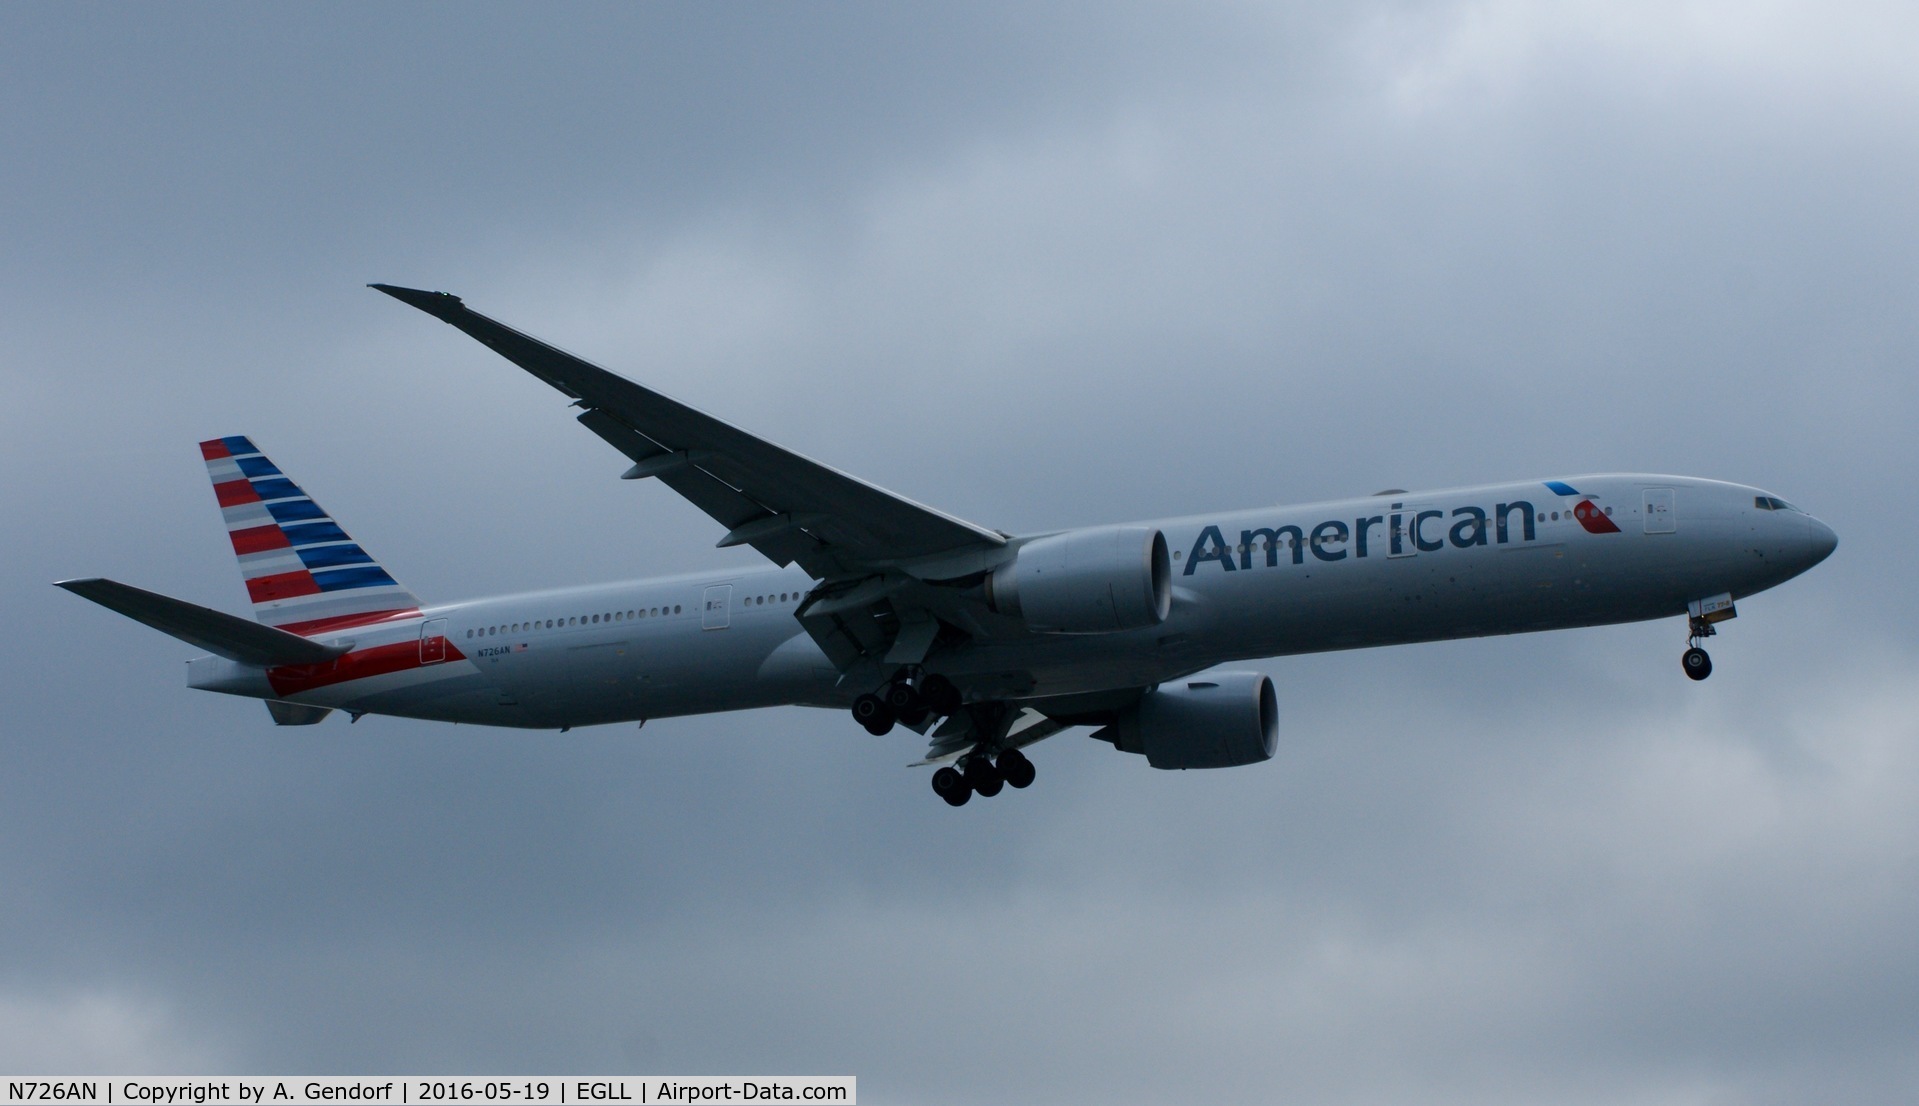 N726AN, 2013 Boeing 777-323/ER C/N 31550, American Airlines, is here on finals at London Heathrow(EGLL)